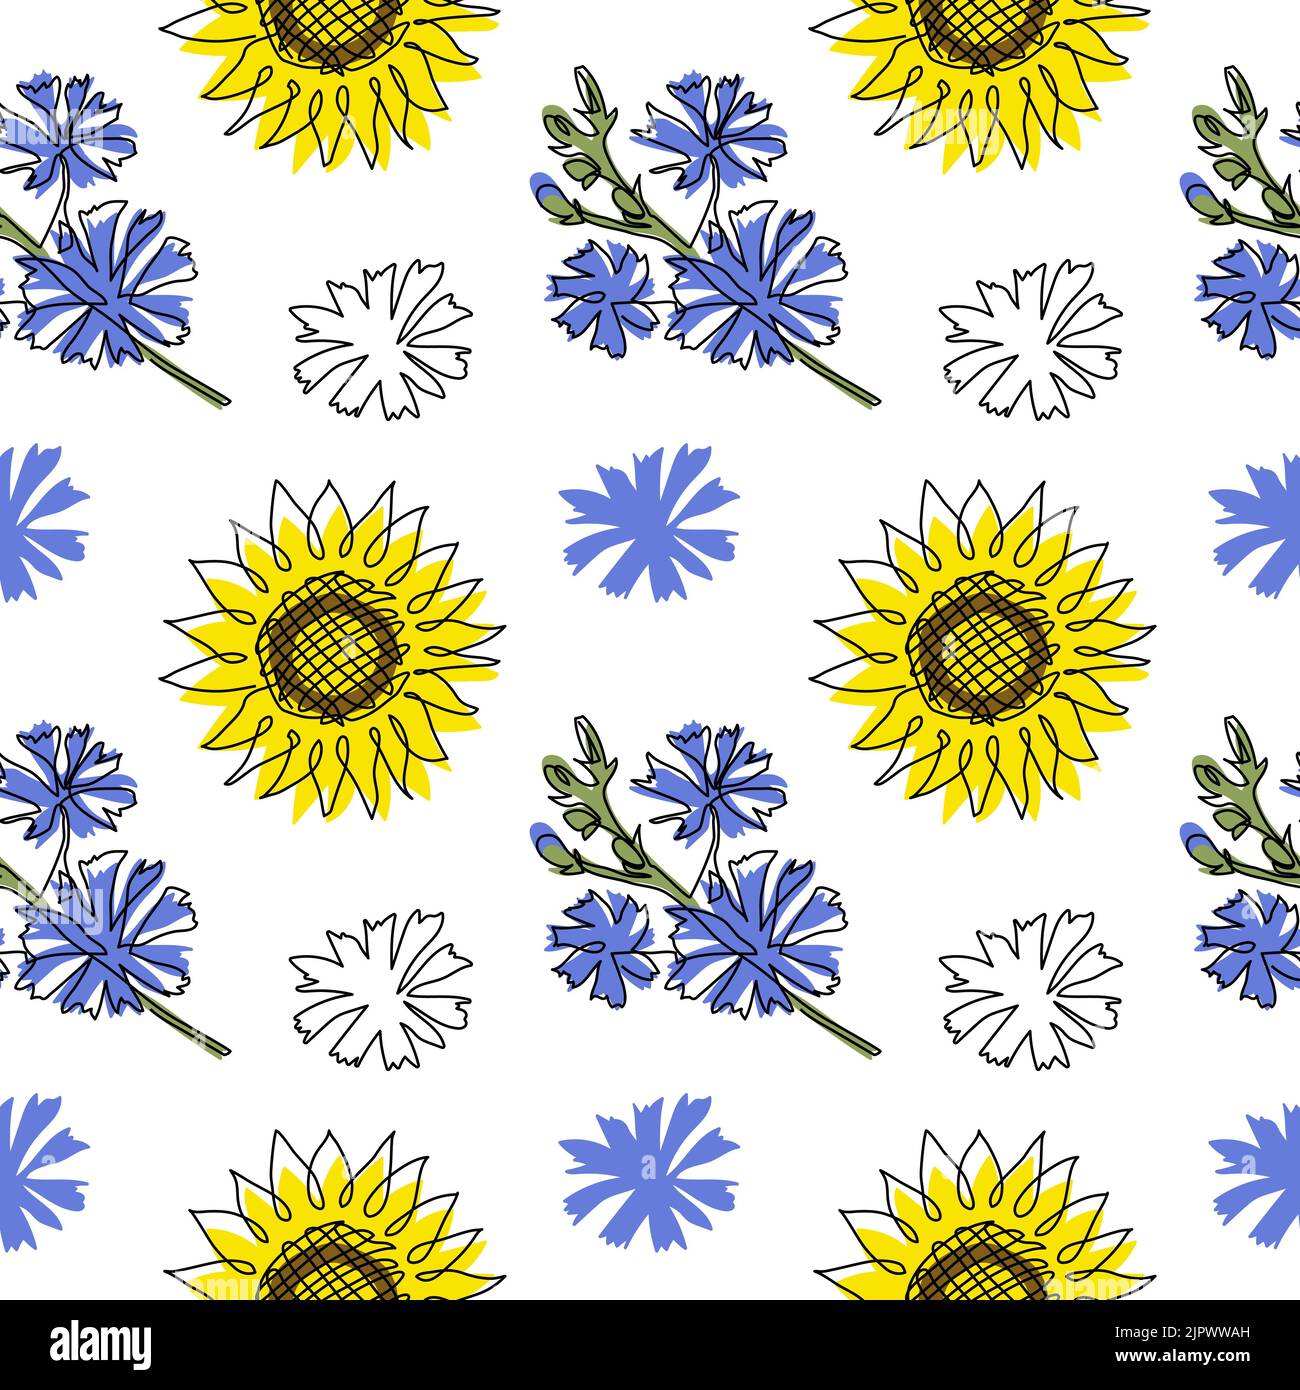 Blue and yellow ua vector pattern with flowers. One continuous line art drawing pattern with sunflower and chicory Stock Vector